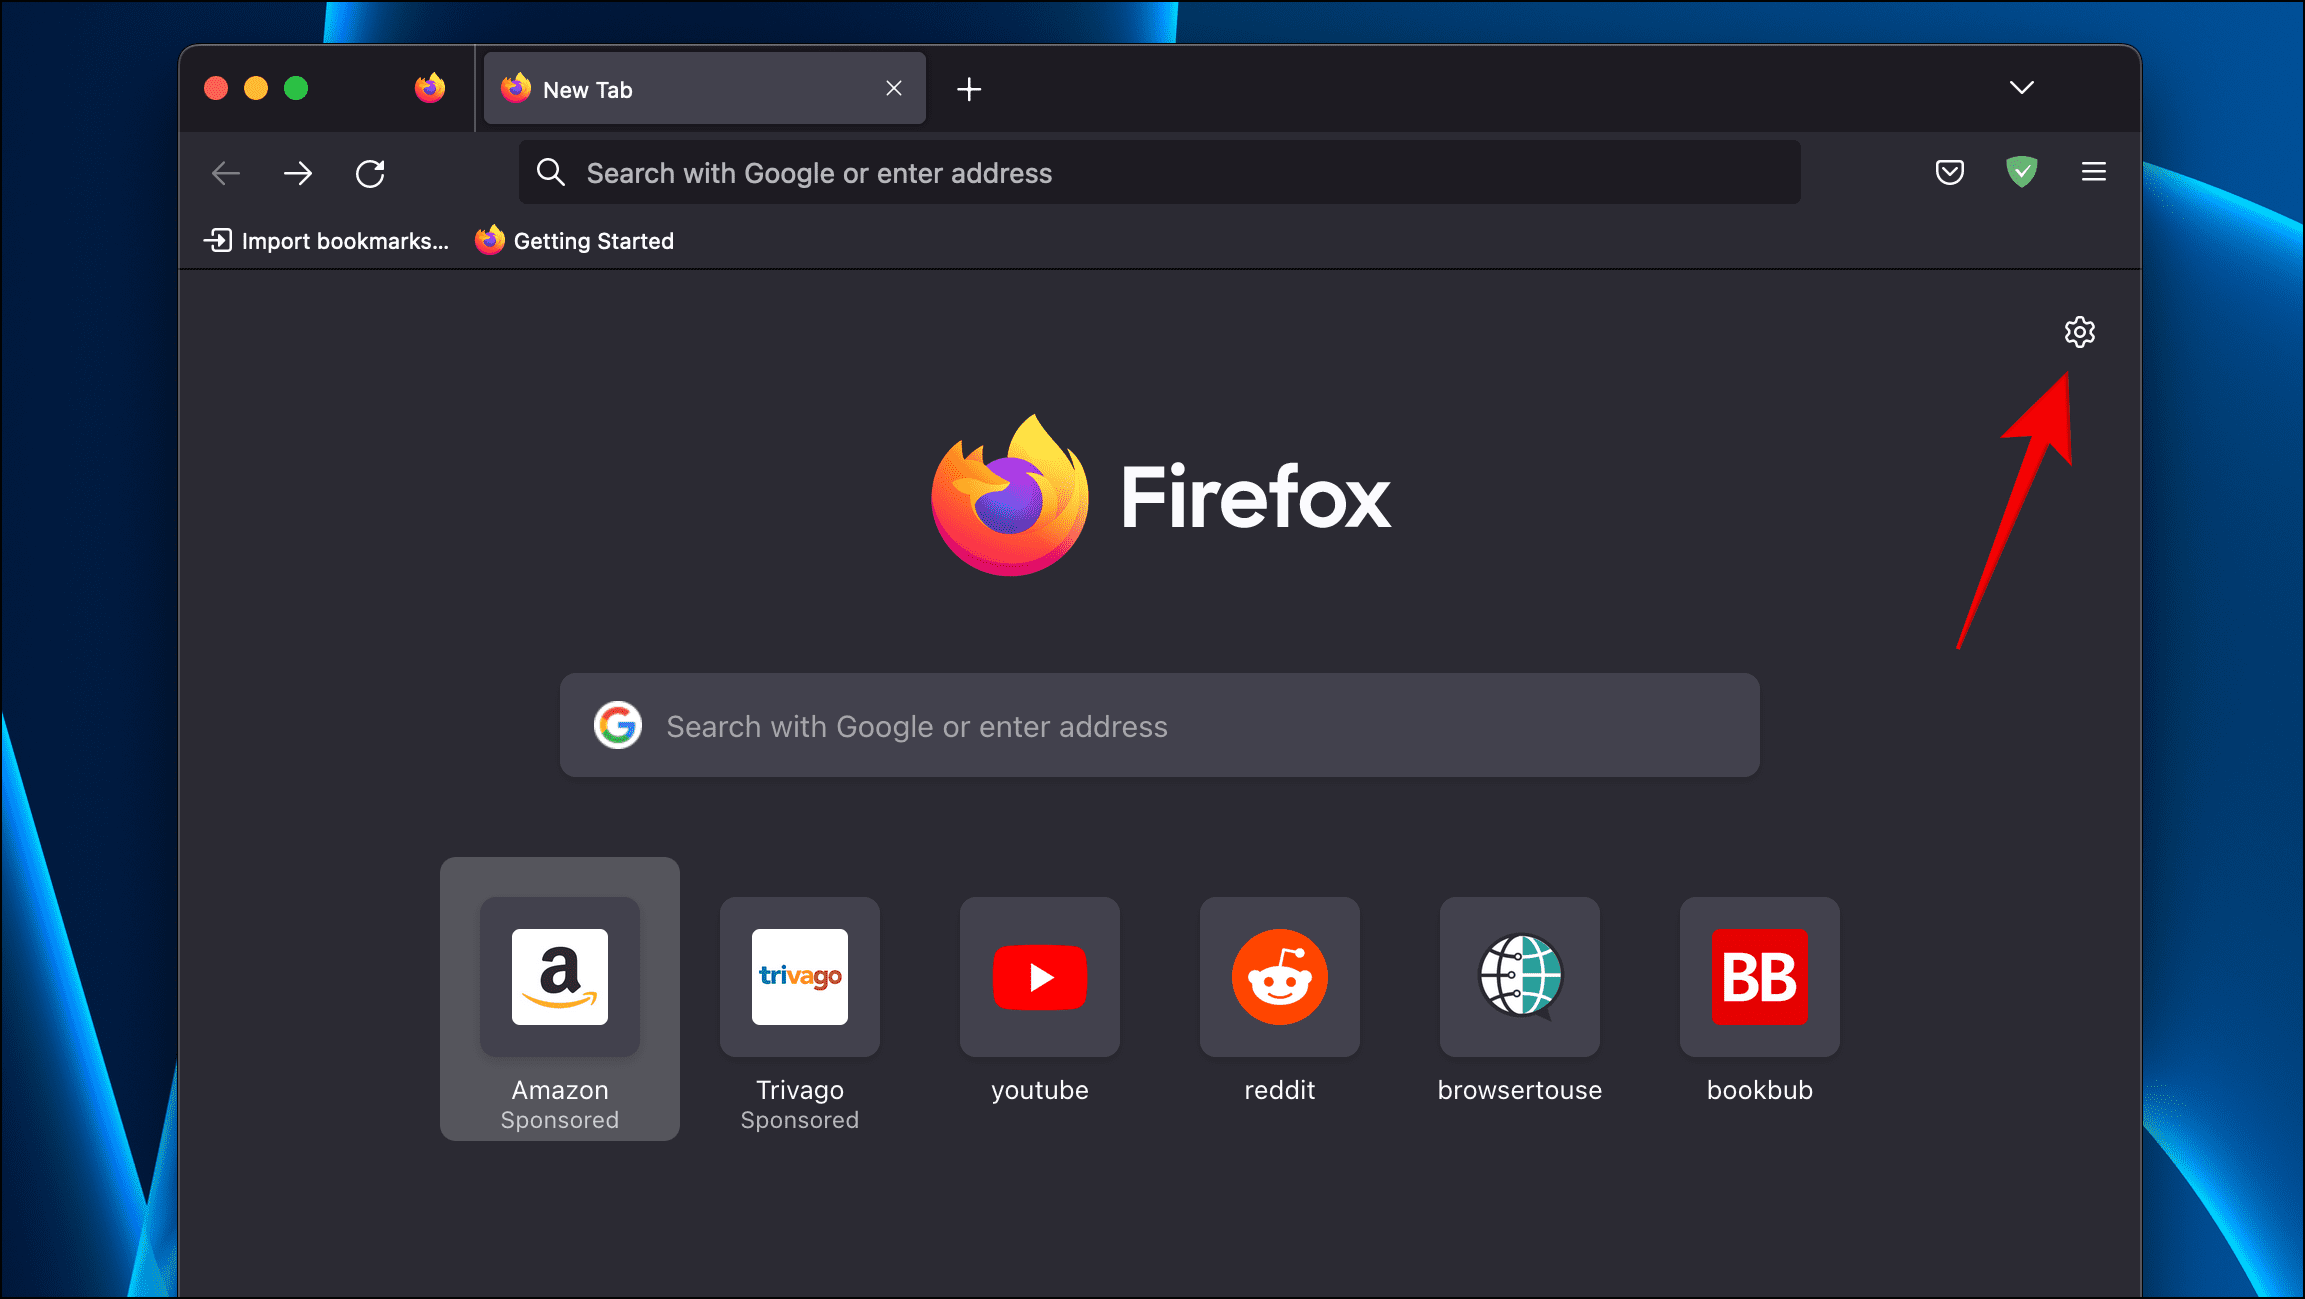 Turn Off Sponsored Shortcuts on Firefox Homepage